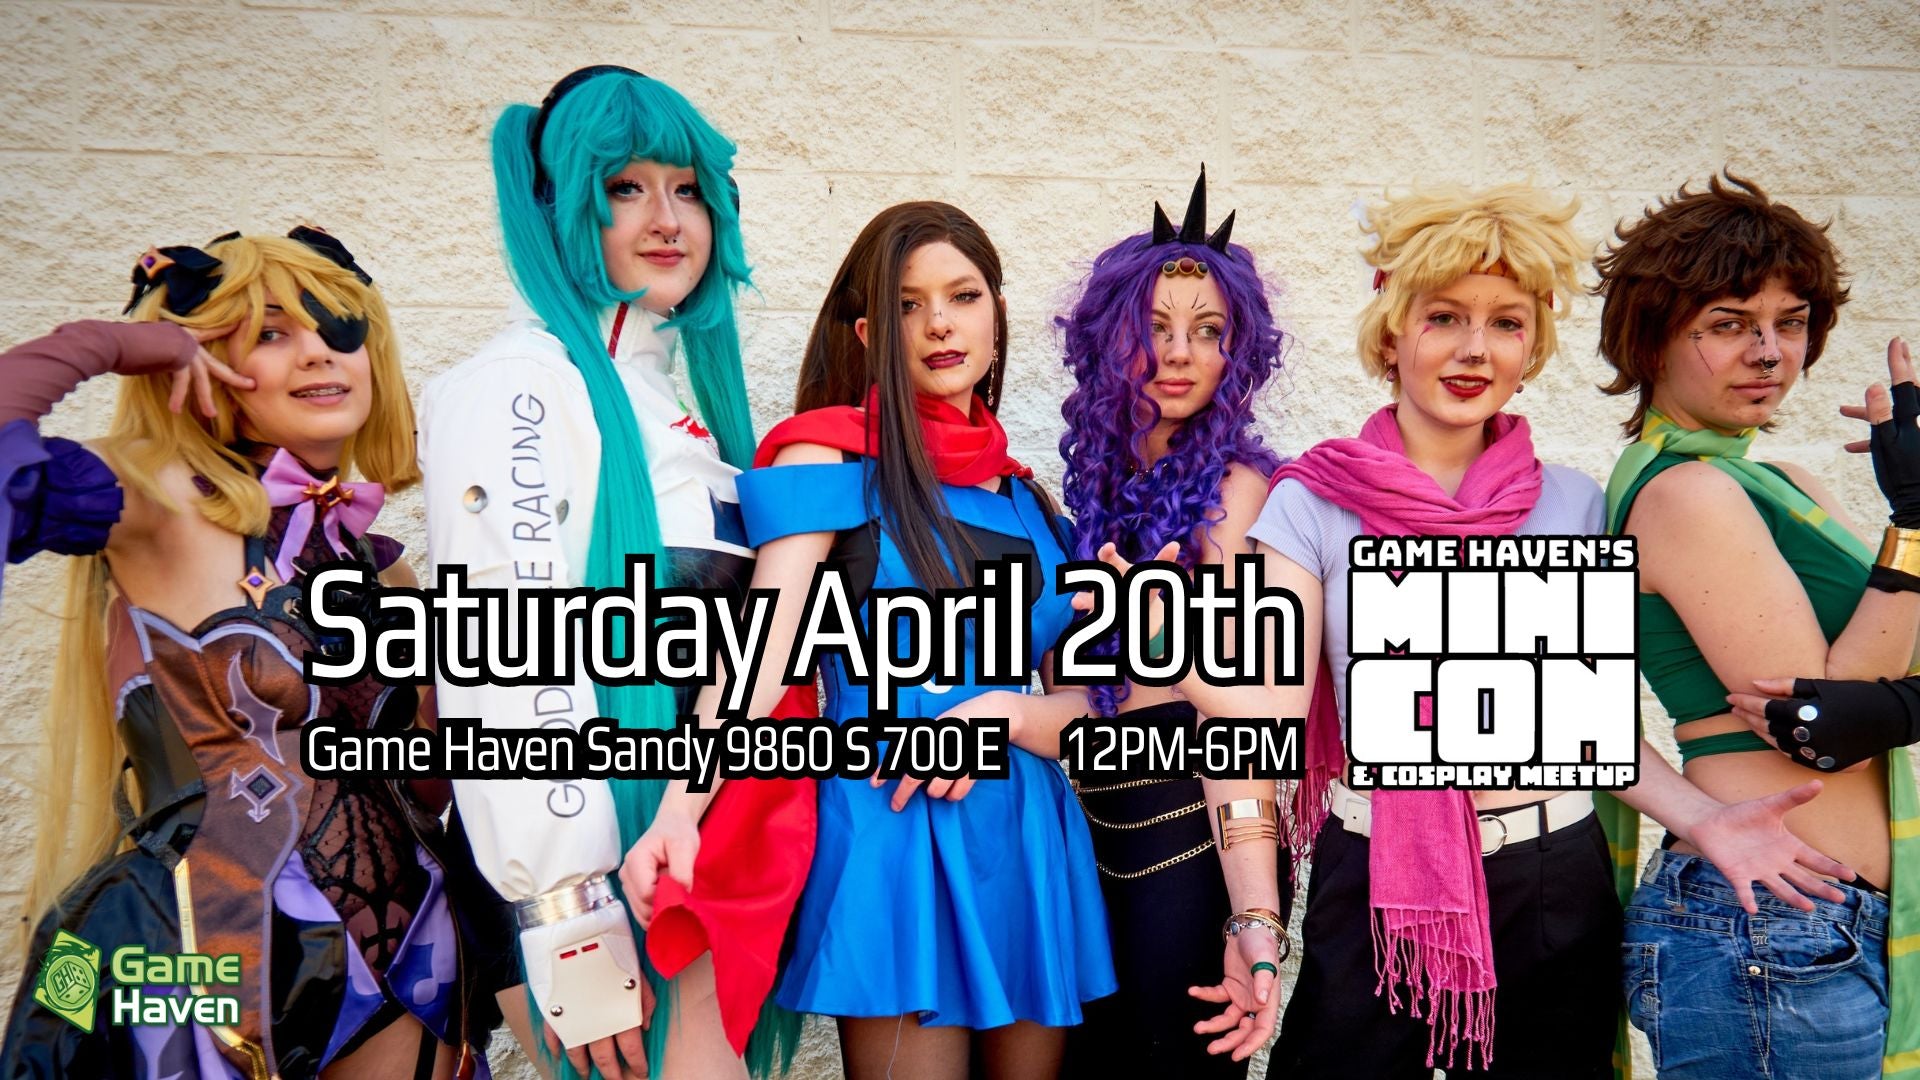 A group of cosplayers with text displayed over it: Saturday April 20th Game Haven Sandy 9860 S 700 E      12PM-6PM Mini Con and Cosplay Meet up Game Haven